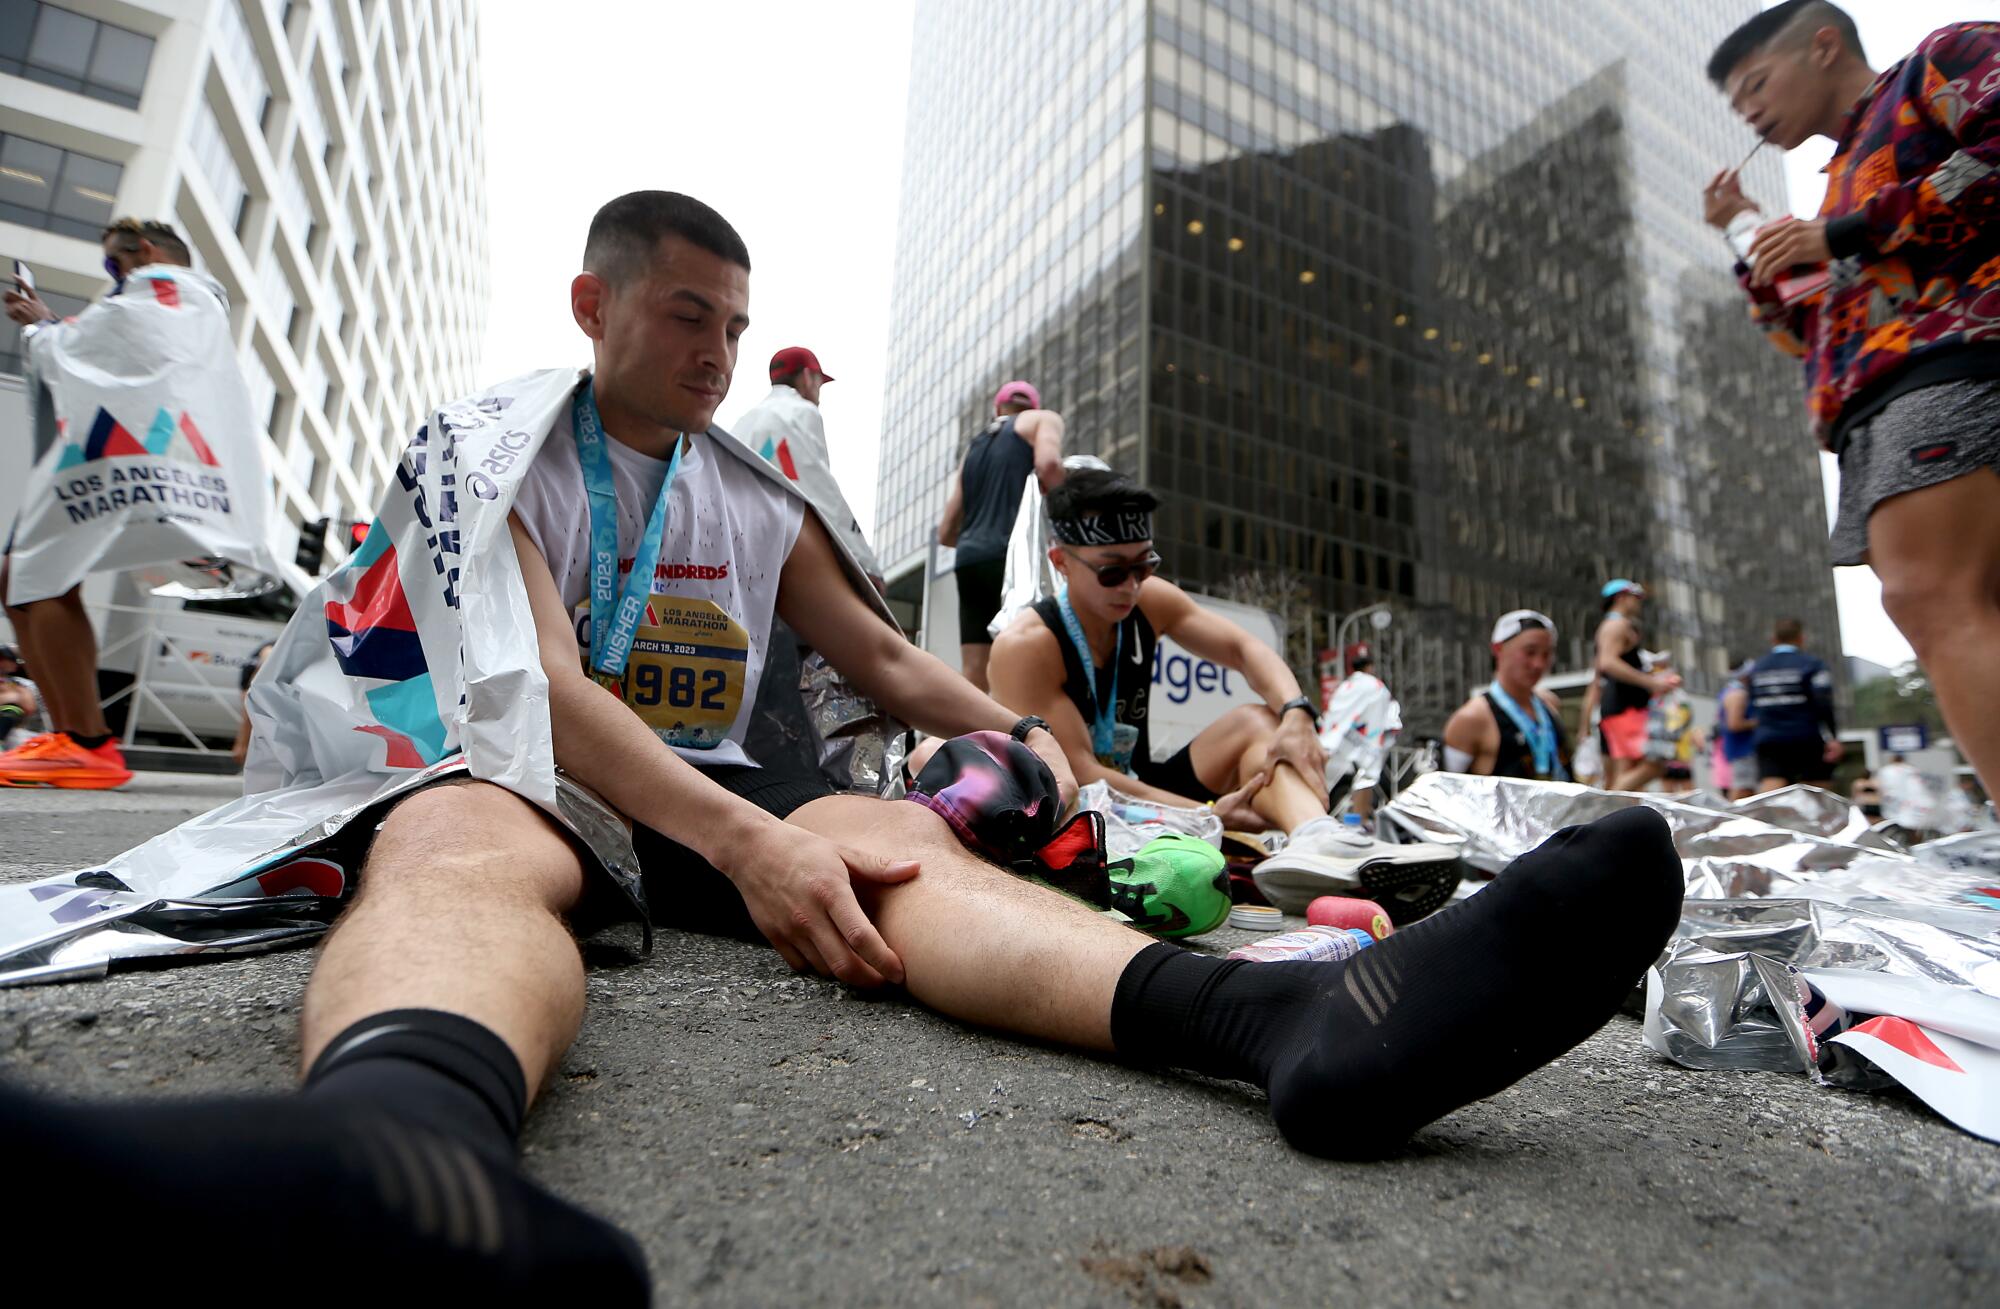 Runners remove their shoes and rest on the streets of Century City after crossing the finish line.